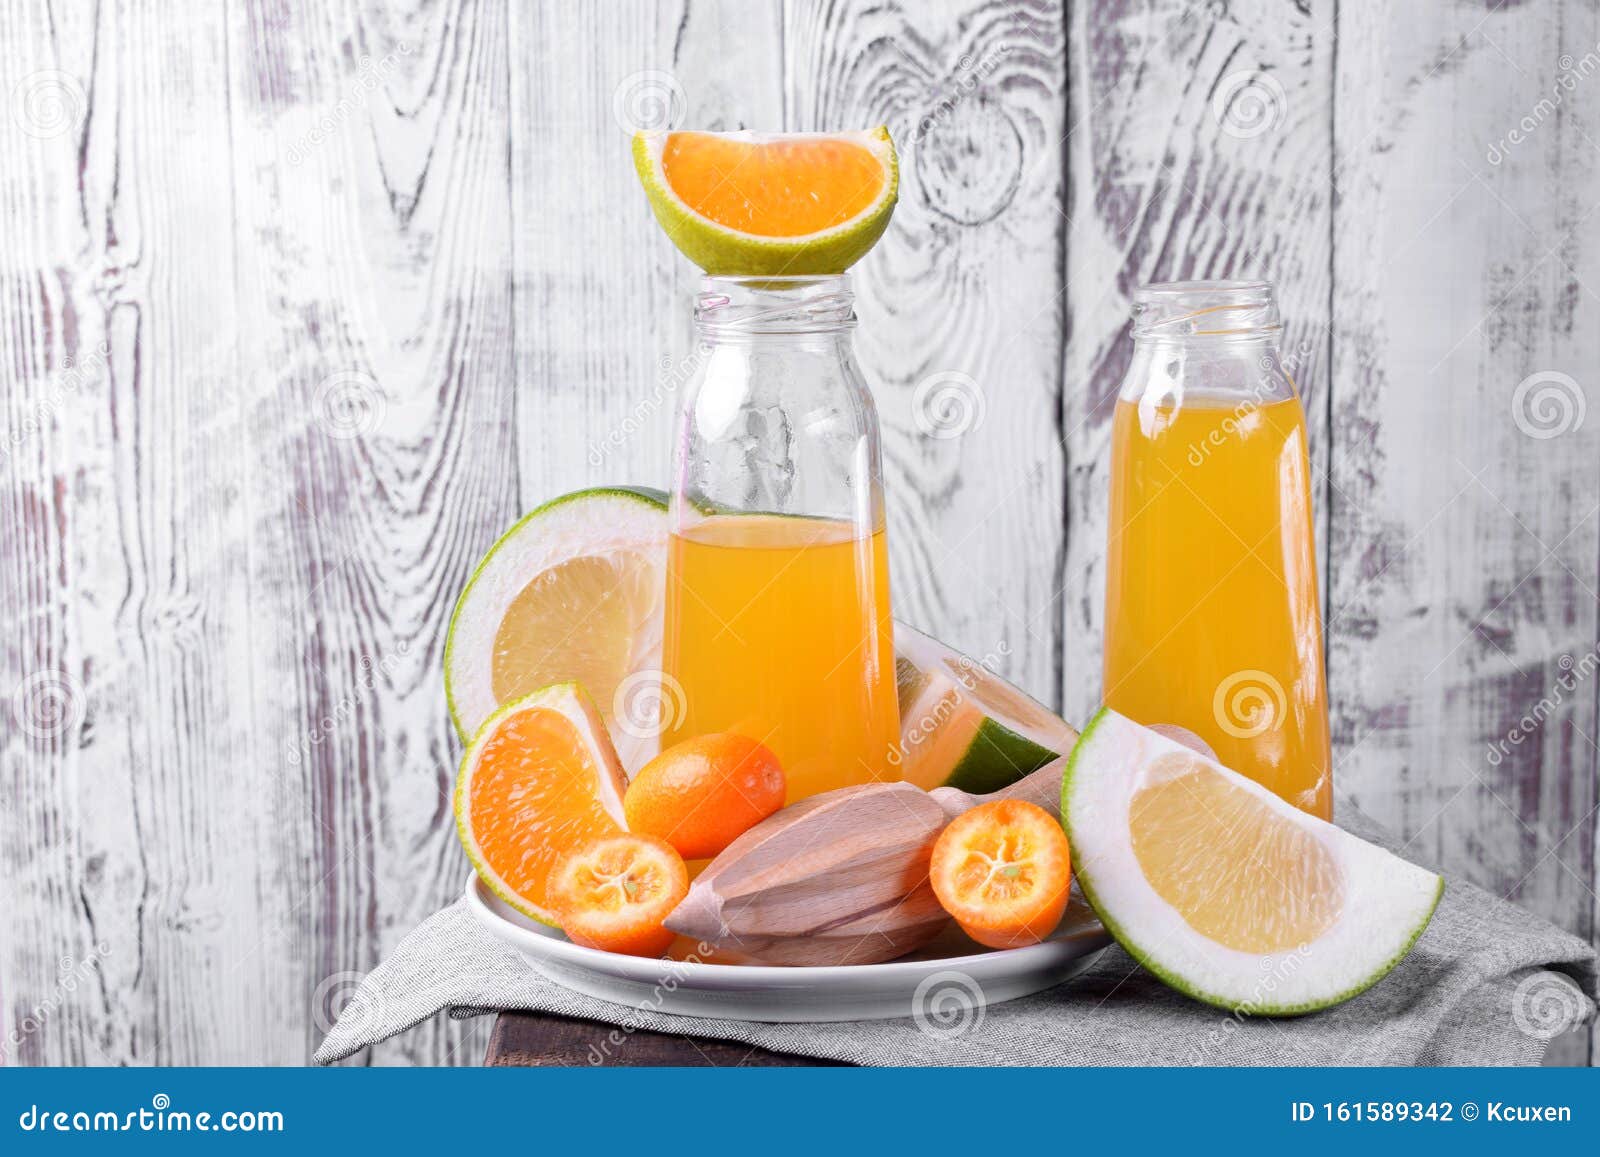 Download Yellow Juice In Glass Bottles And Pieces Of Citrus Fruits Stock Photo Image Of Drink Bottles 161589342 Yellowimages Mockups